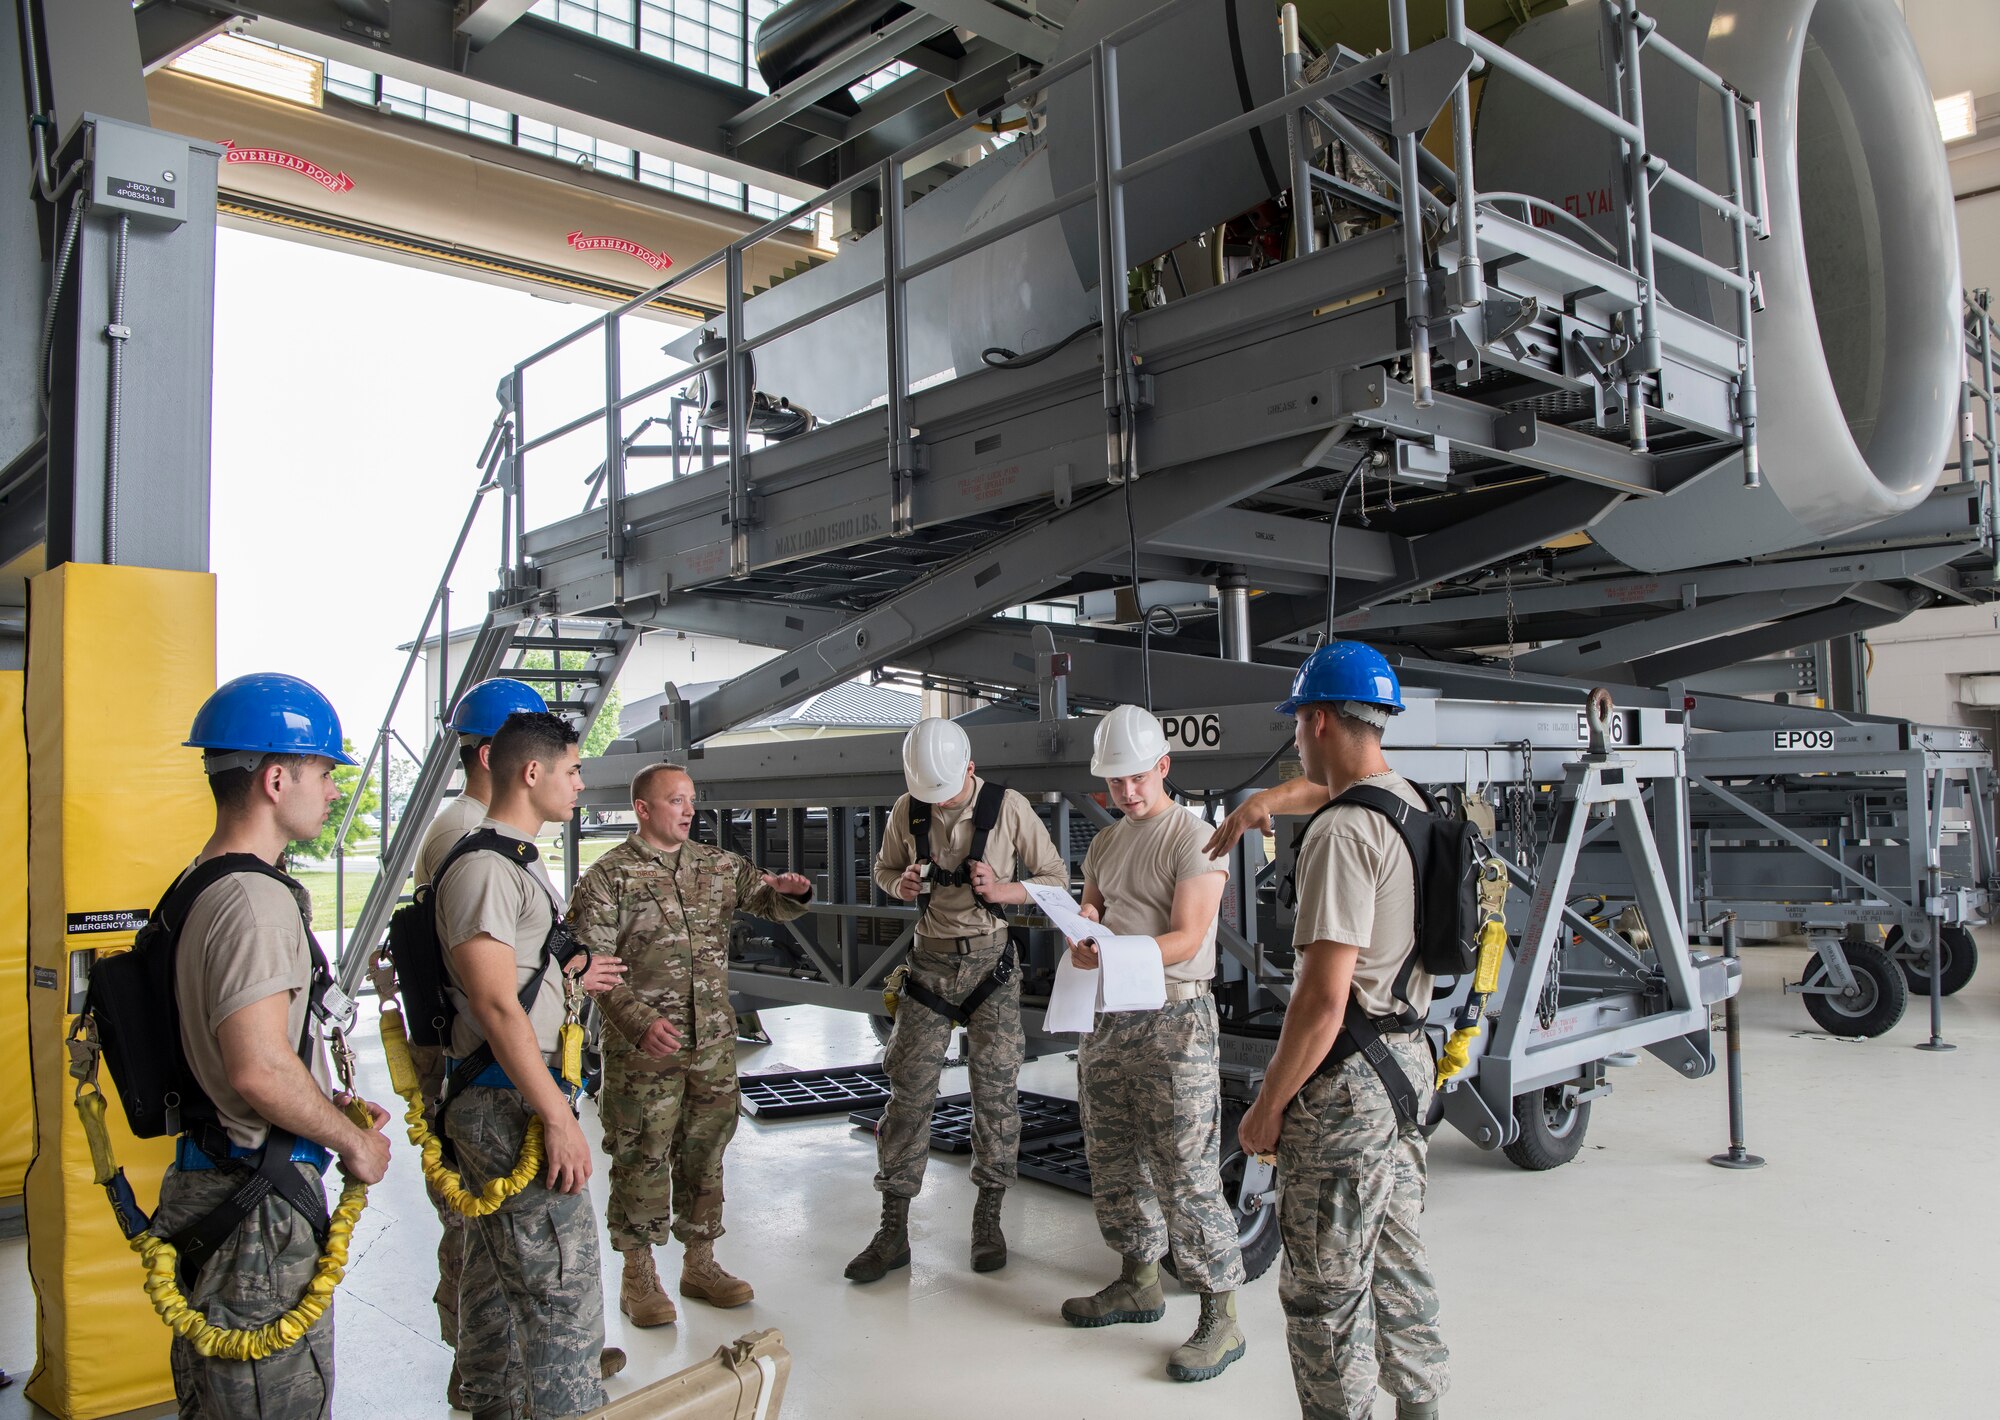 Tech. Sgt. Robert Enrico, 373rd Training Squadron field training detachment instructor, Detachment 3, gives helpful instructions to the Airmen attending the C-5M Super Galaxy engine-changing course June 6, 2019, Dover Air Force Base, Del. Enrico only provided advice when it was needed, which allowed the Airmen to work together as a team and apply the knowledge they obtained throughout the course. (U.S. Air Force photo by Senior Airman Christopher Quail)